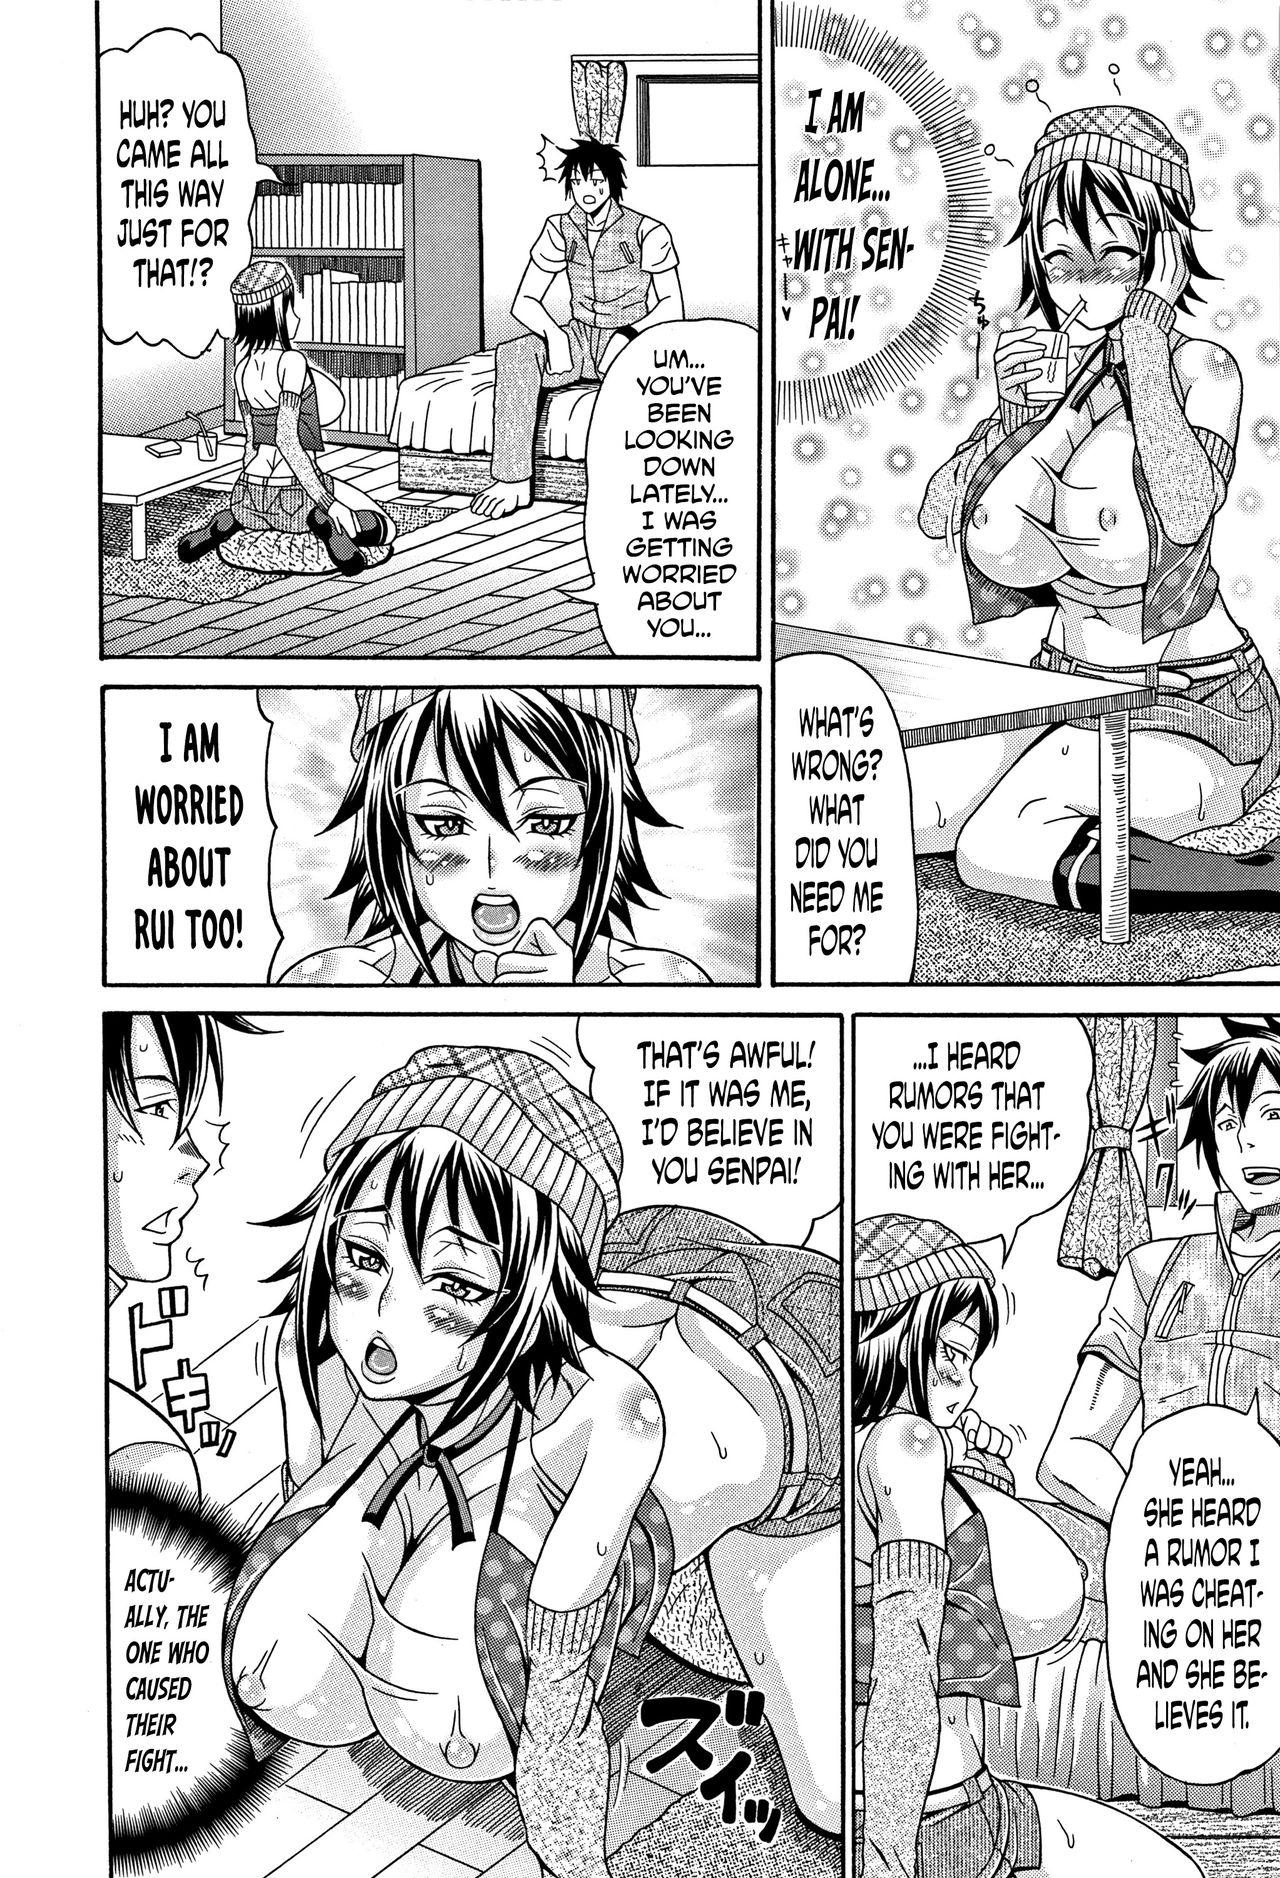 [Andou Hiroyuki] Mamire Chichi - Sticky Tits Feel Hot All Over. Ch.1-10 [English] [doujin-moe.us] 56